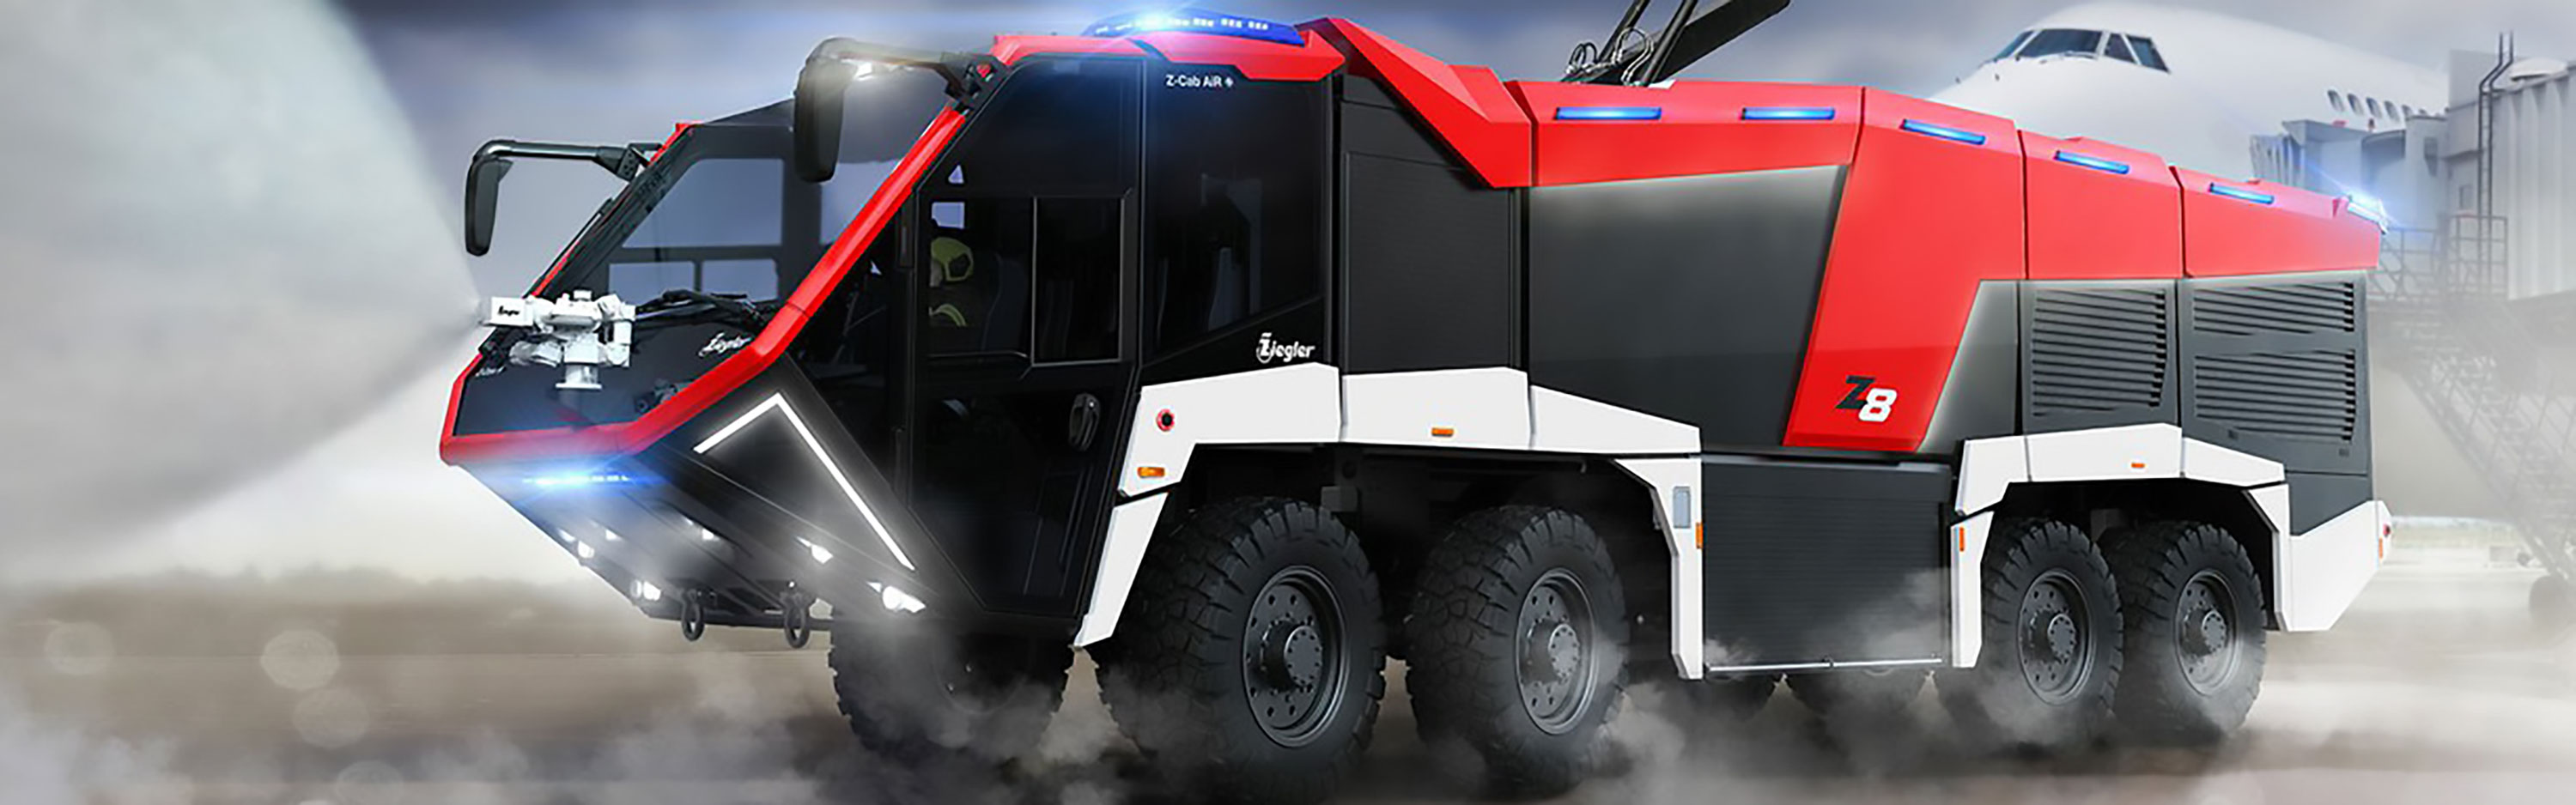 Futuristic airport firefighting vehicle in action, spraying water with its mounted cannons, featuring a sleek black and red design, illuminated by blue emergency lights.